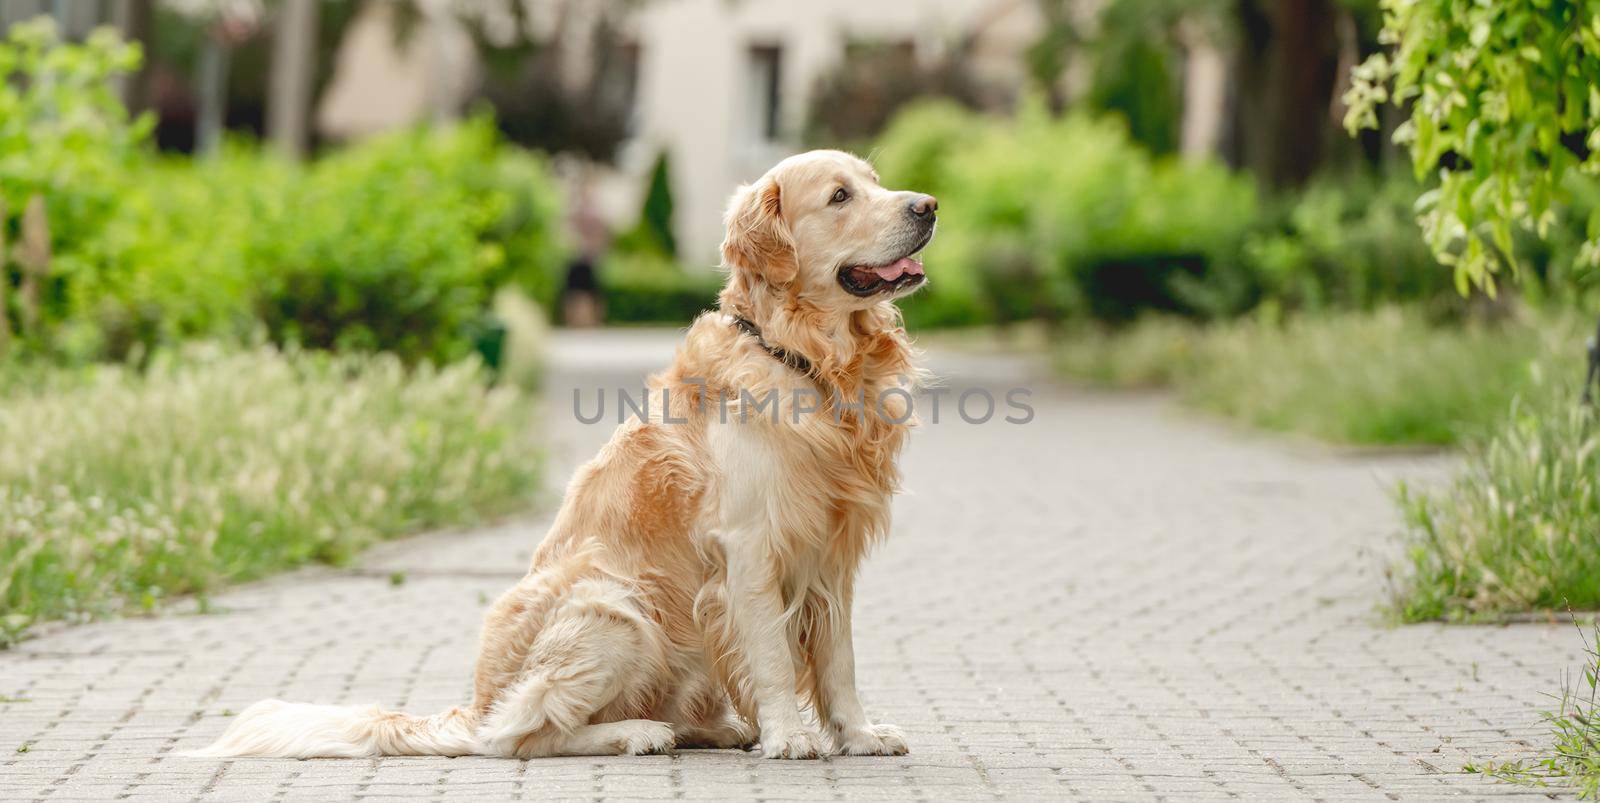 Golden retriever dog sitting at street and looking back. Purebred pet doggy labrador outdoors at city with green grass